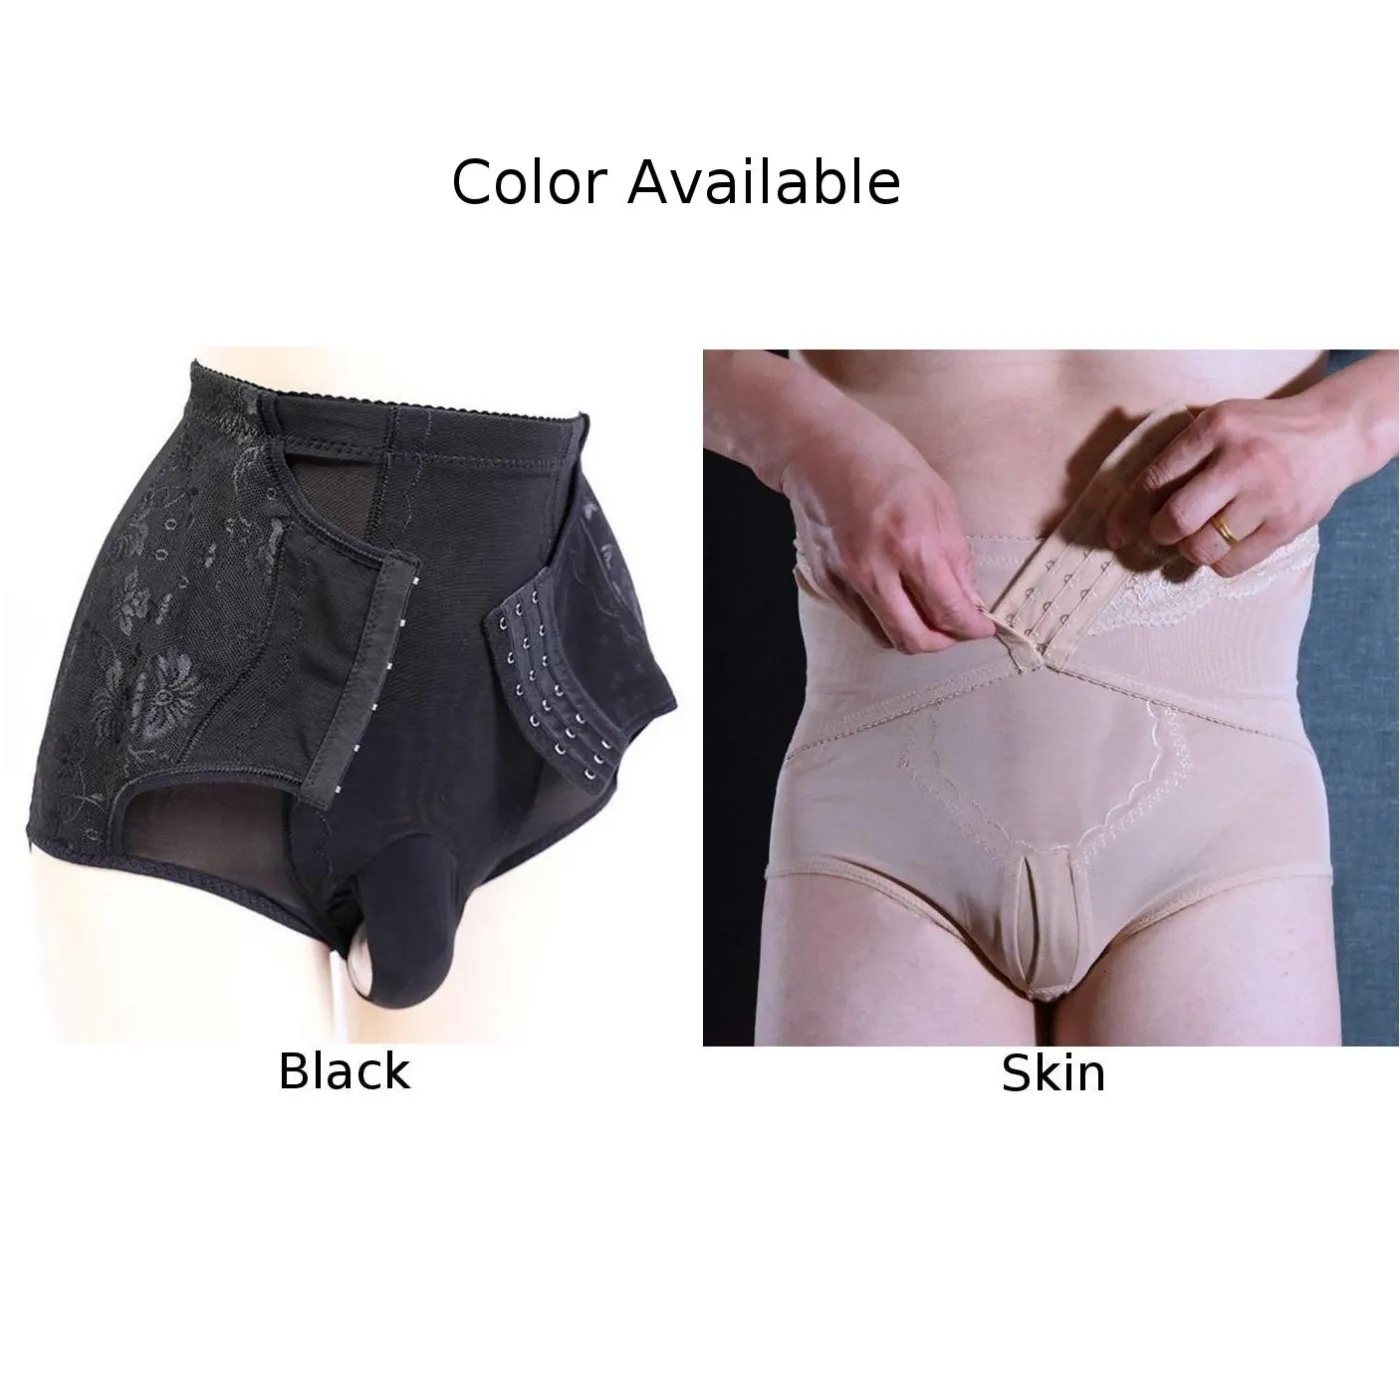 Mens Waist Tummy Control Postpartum Corset Panties Sexy Slimming Underwear  With High Butt Lifter And Body Control Shapewear 221208 From Diao07, $8.88